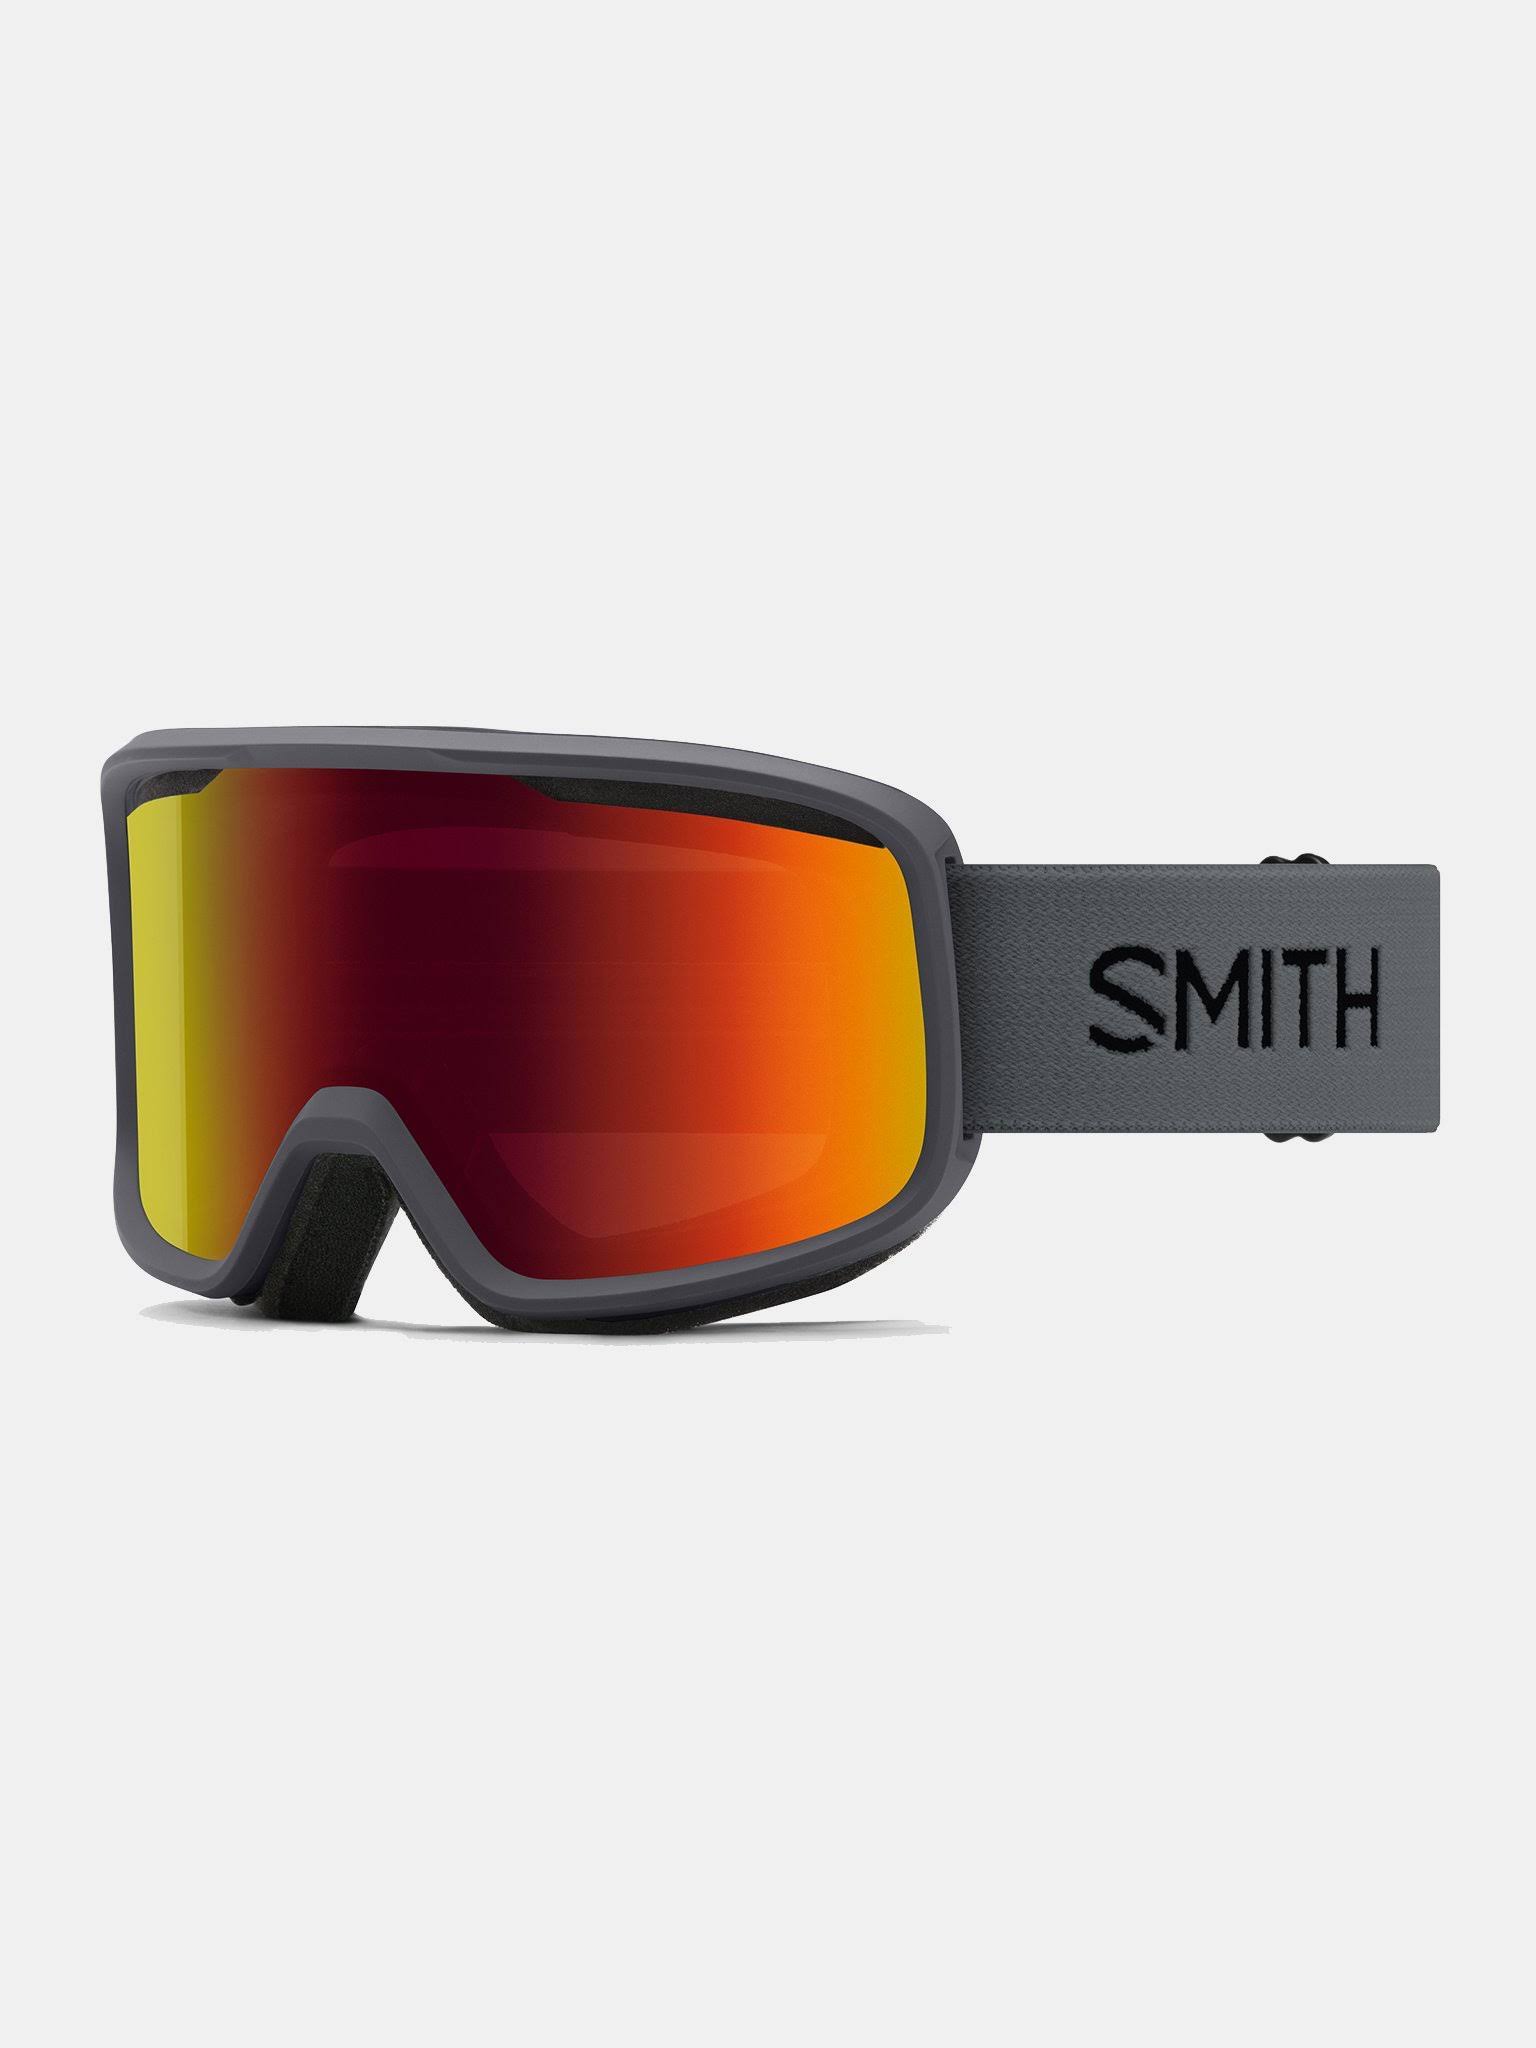 Smith Frontier Snow Goggles - Charcoal Red Sol-X Mirror